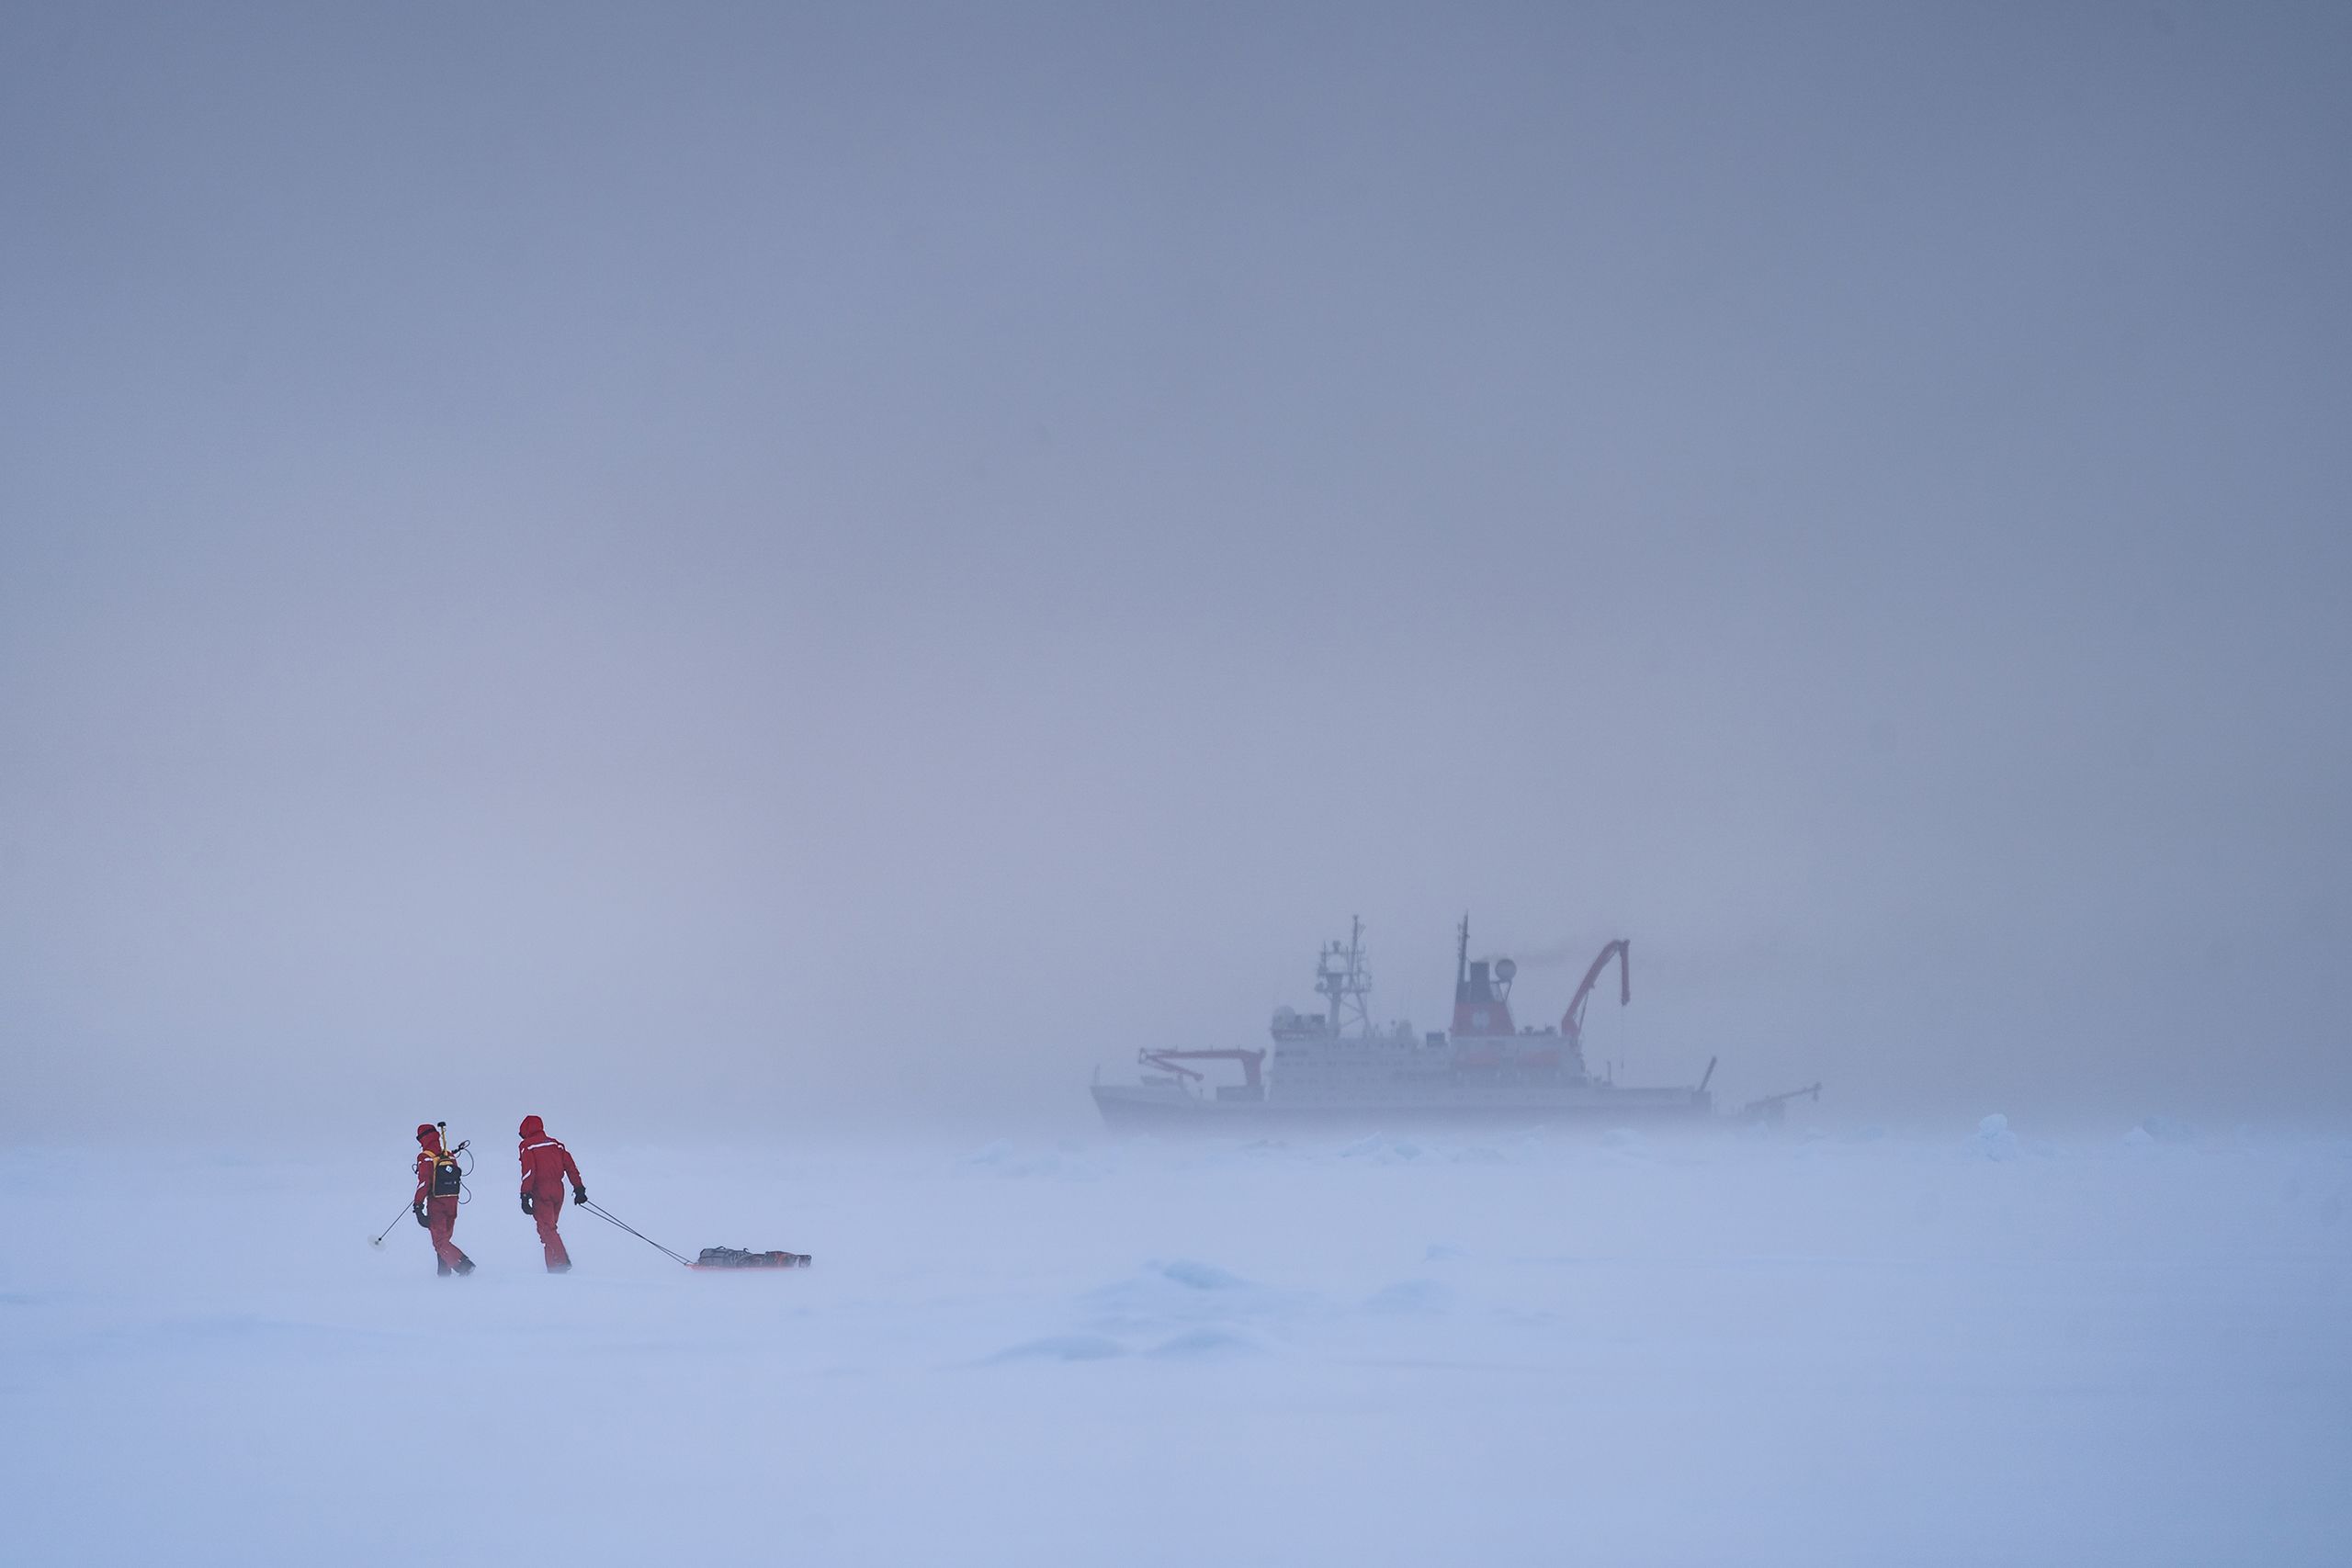 Two scientists drag equipment along on a sled over an ice floe while the Polarstern research vessel is visible through mist in the distance